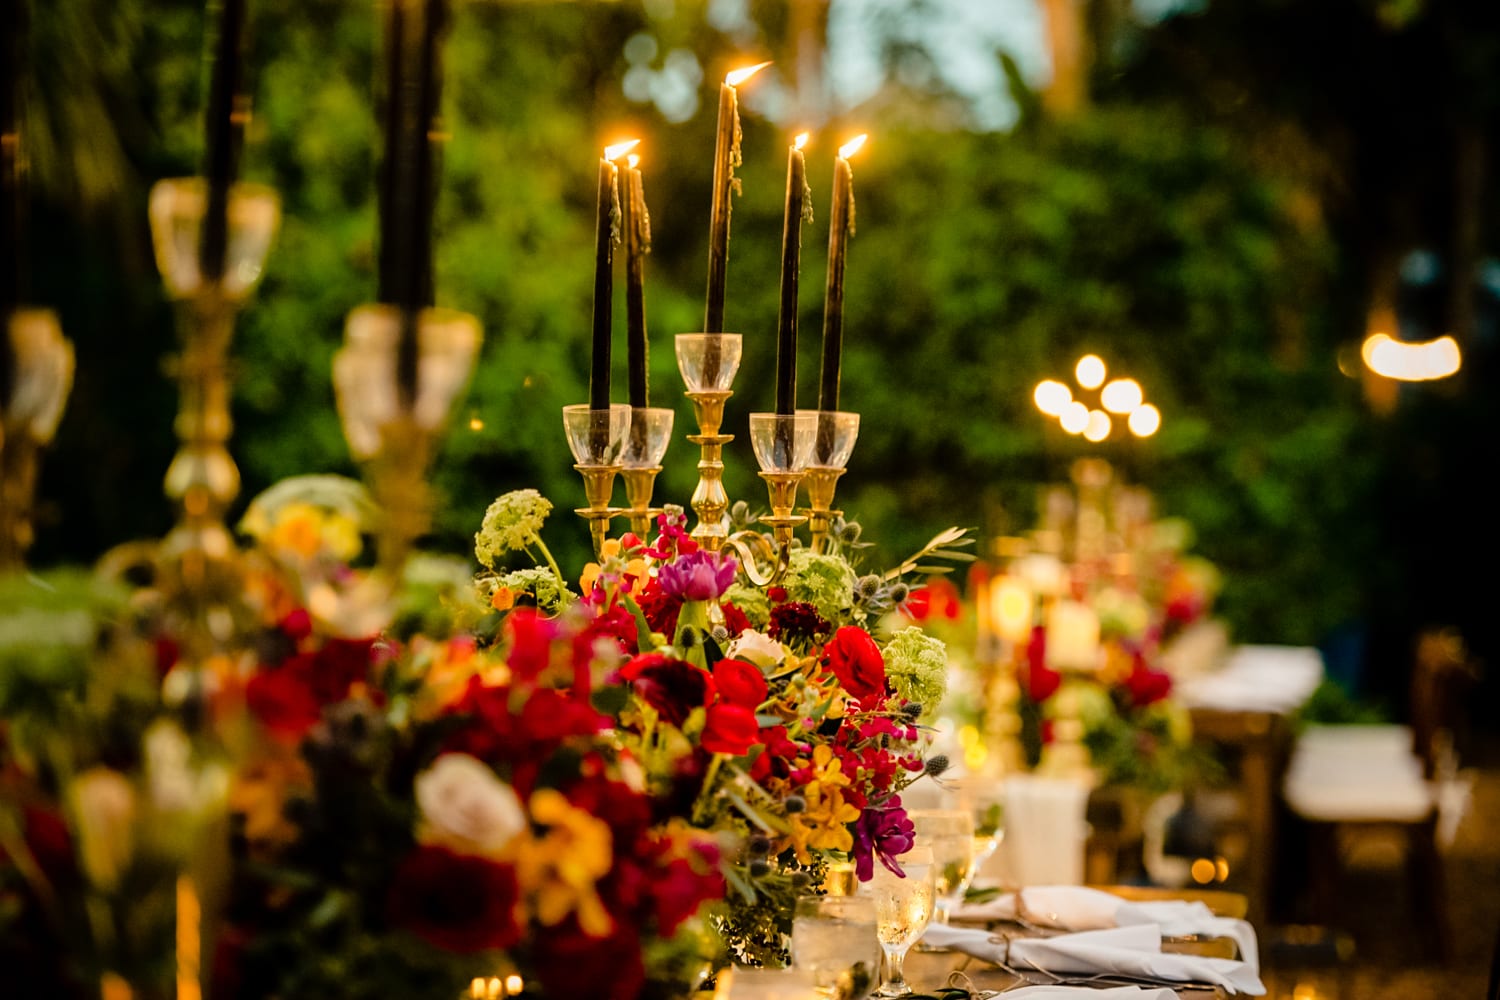 A Hemingway-themed wedding set up with candles and flowers at the historic home.